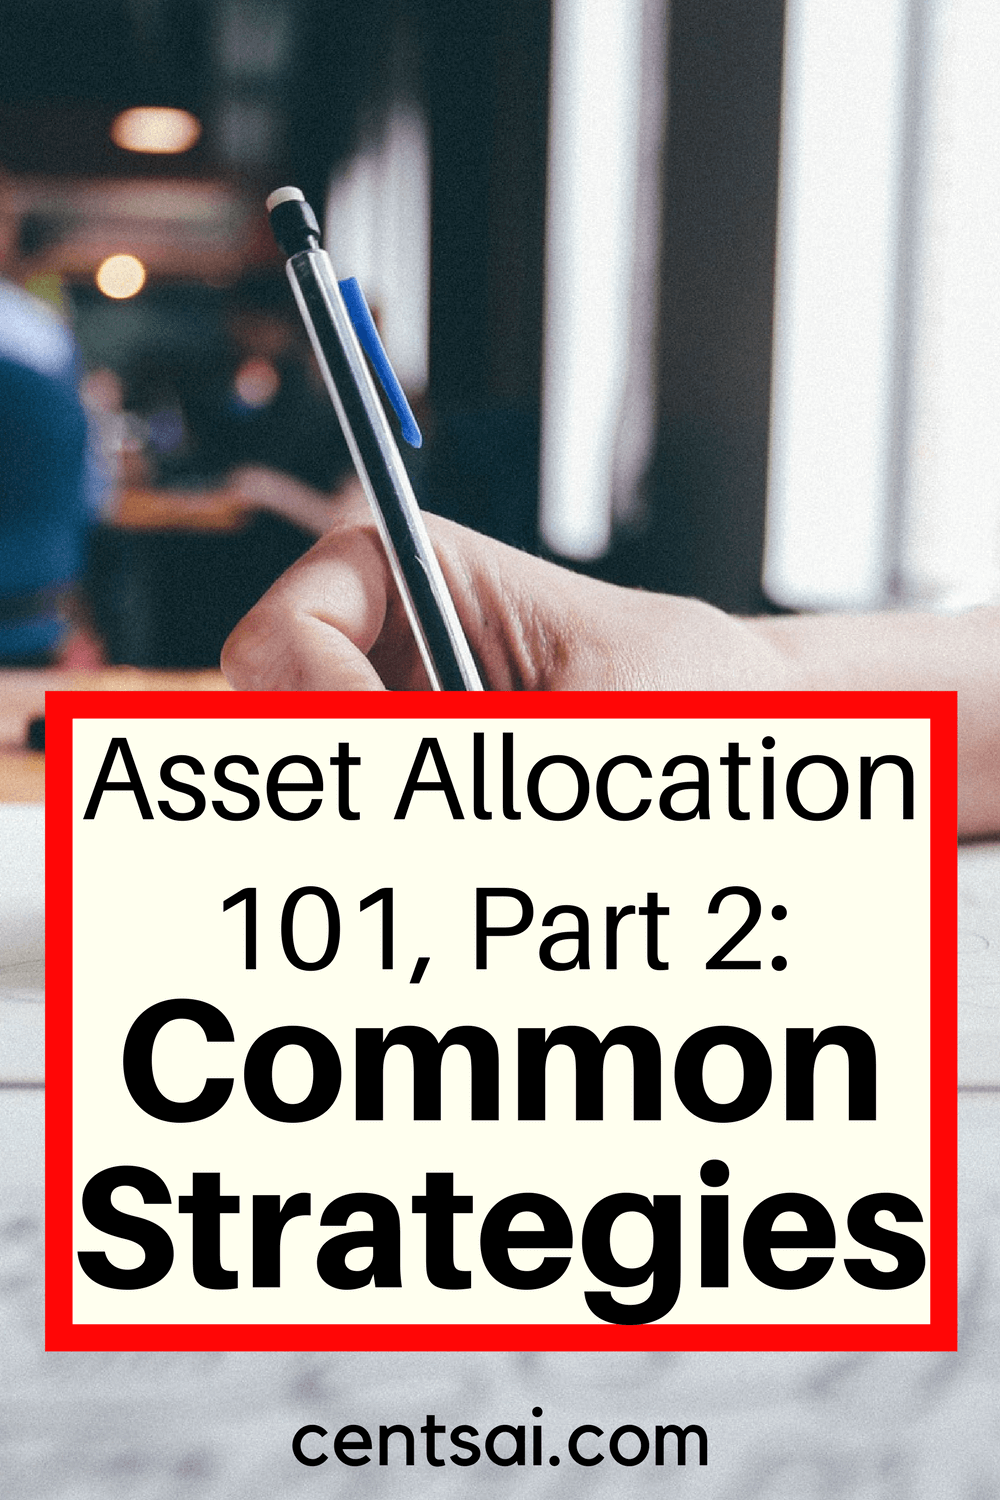 Asset Allocation 101, Part 2: Common Asset Allocation Strategies. Managing risk, and also managing investor behavior, are both enhanced by the appropriate use of tools such as asset allocation.